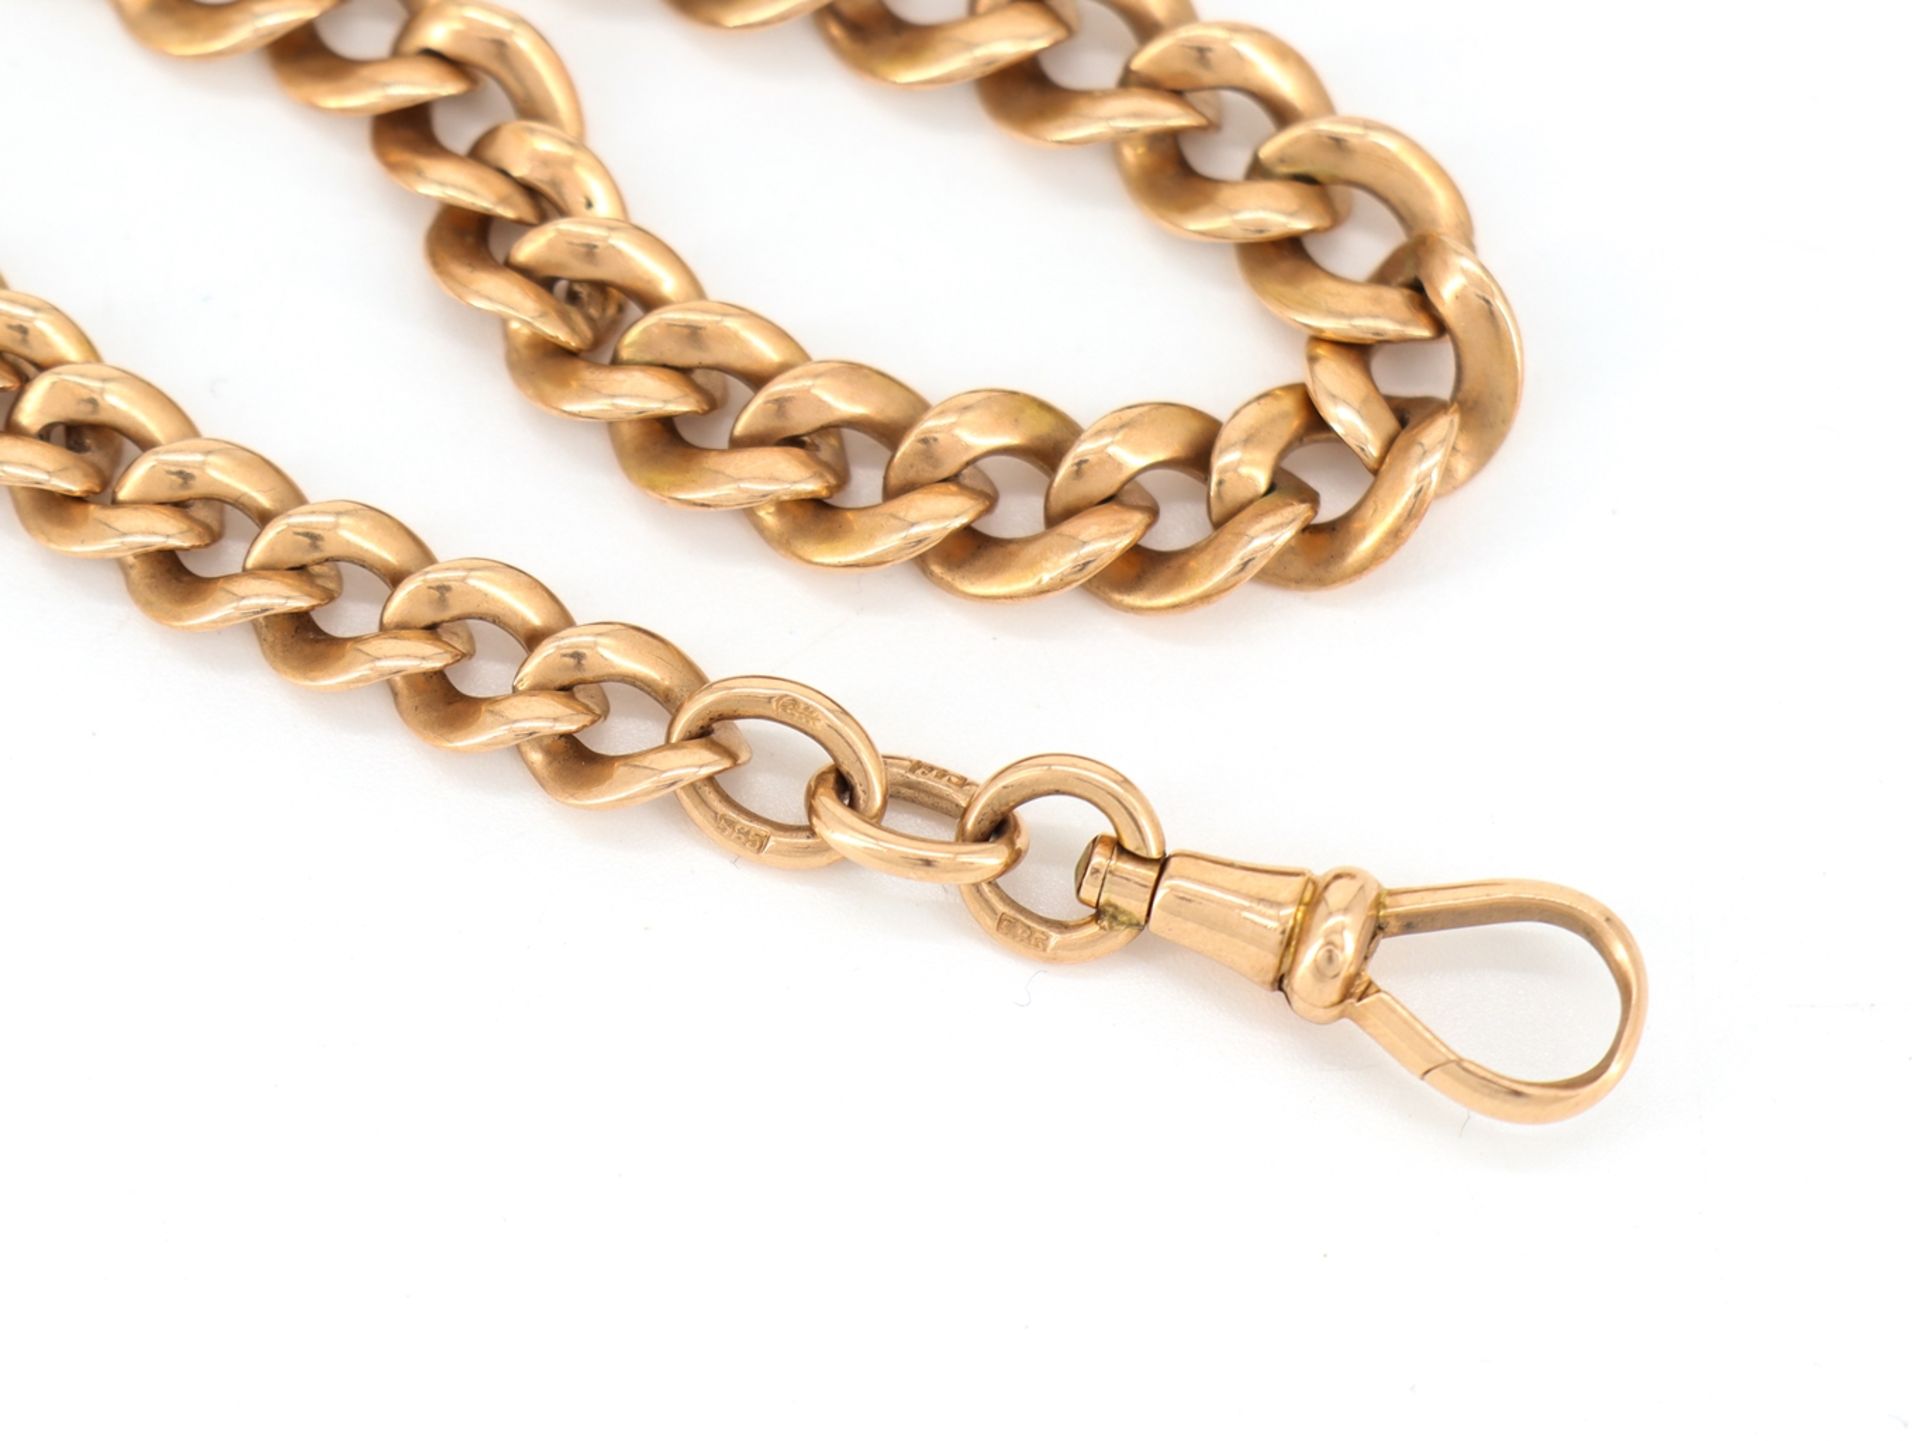 Heavy watch chain in 14 K, 585 red gold around 1900. - Image 4 of 4